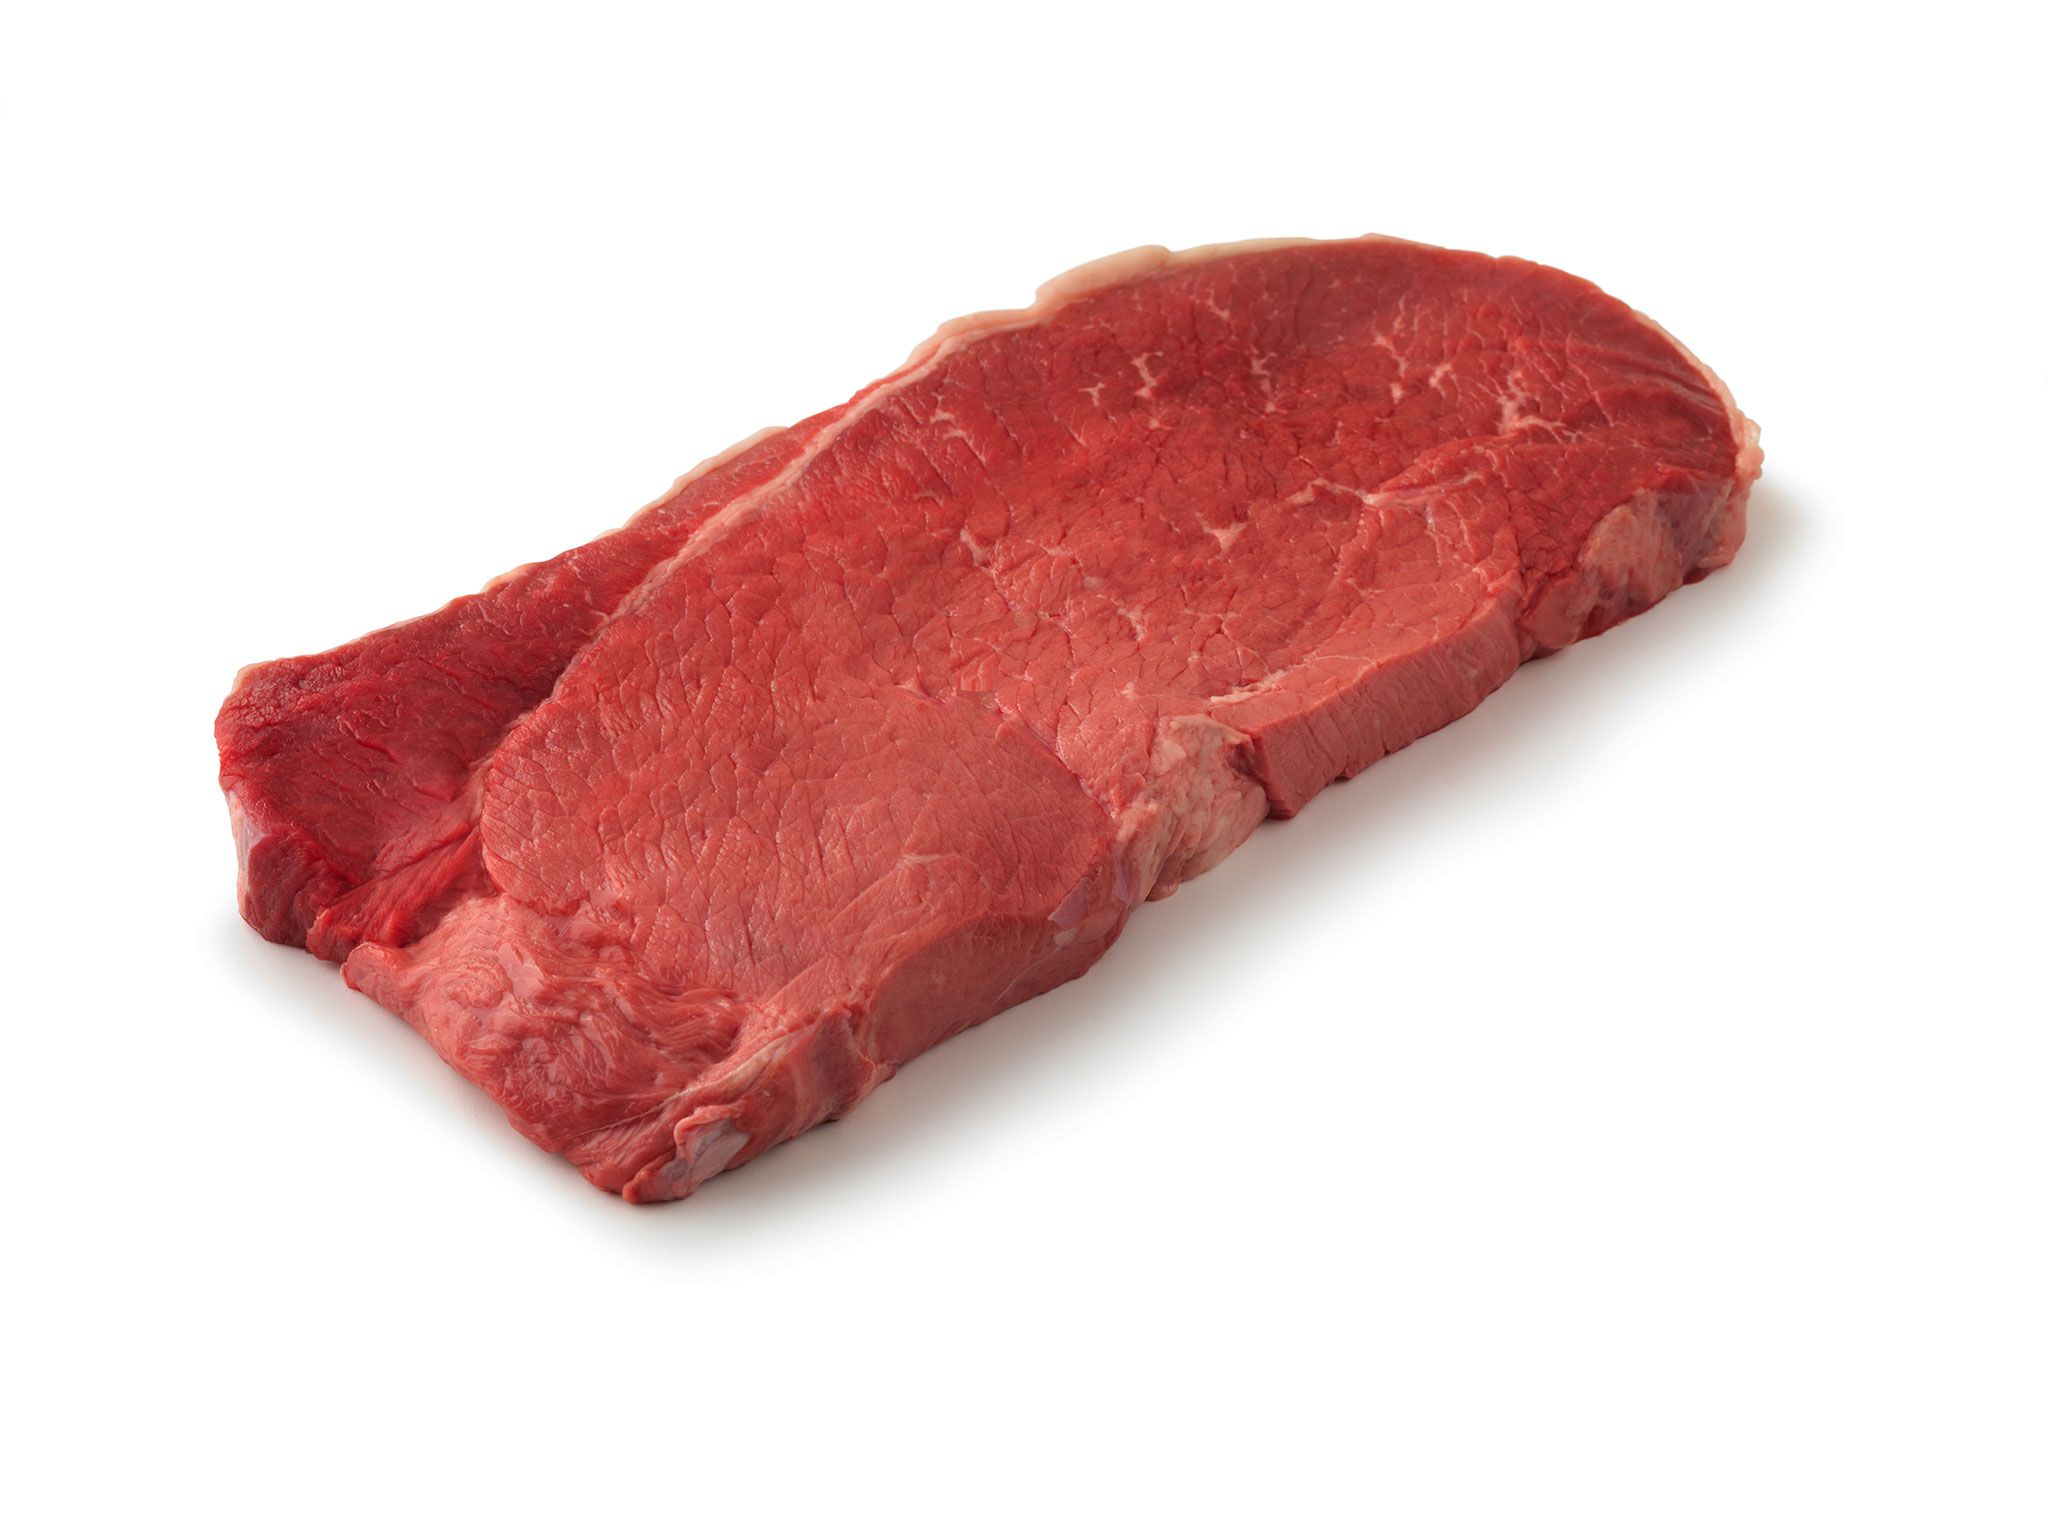 Affordable Meat Selection